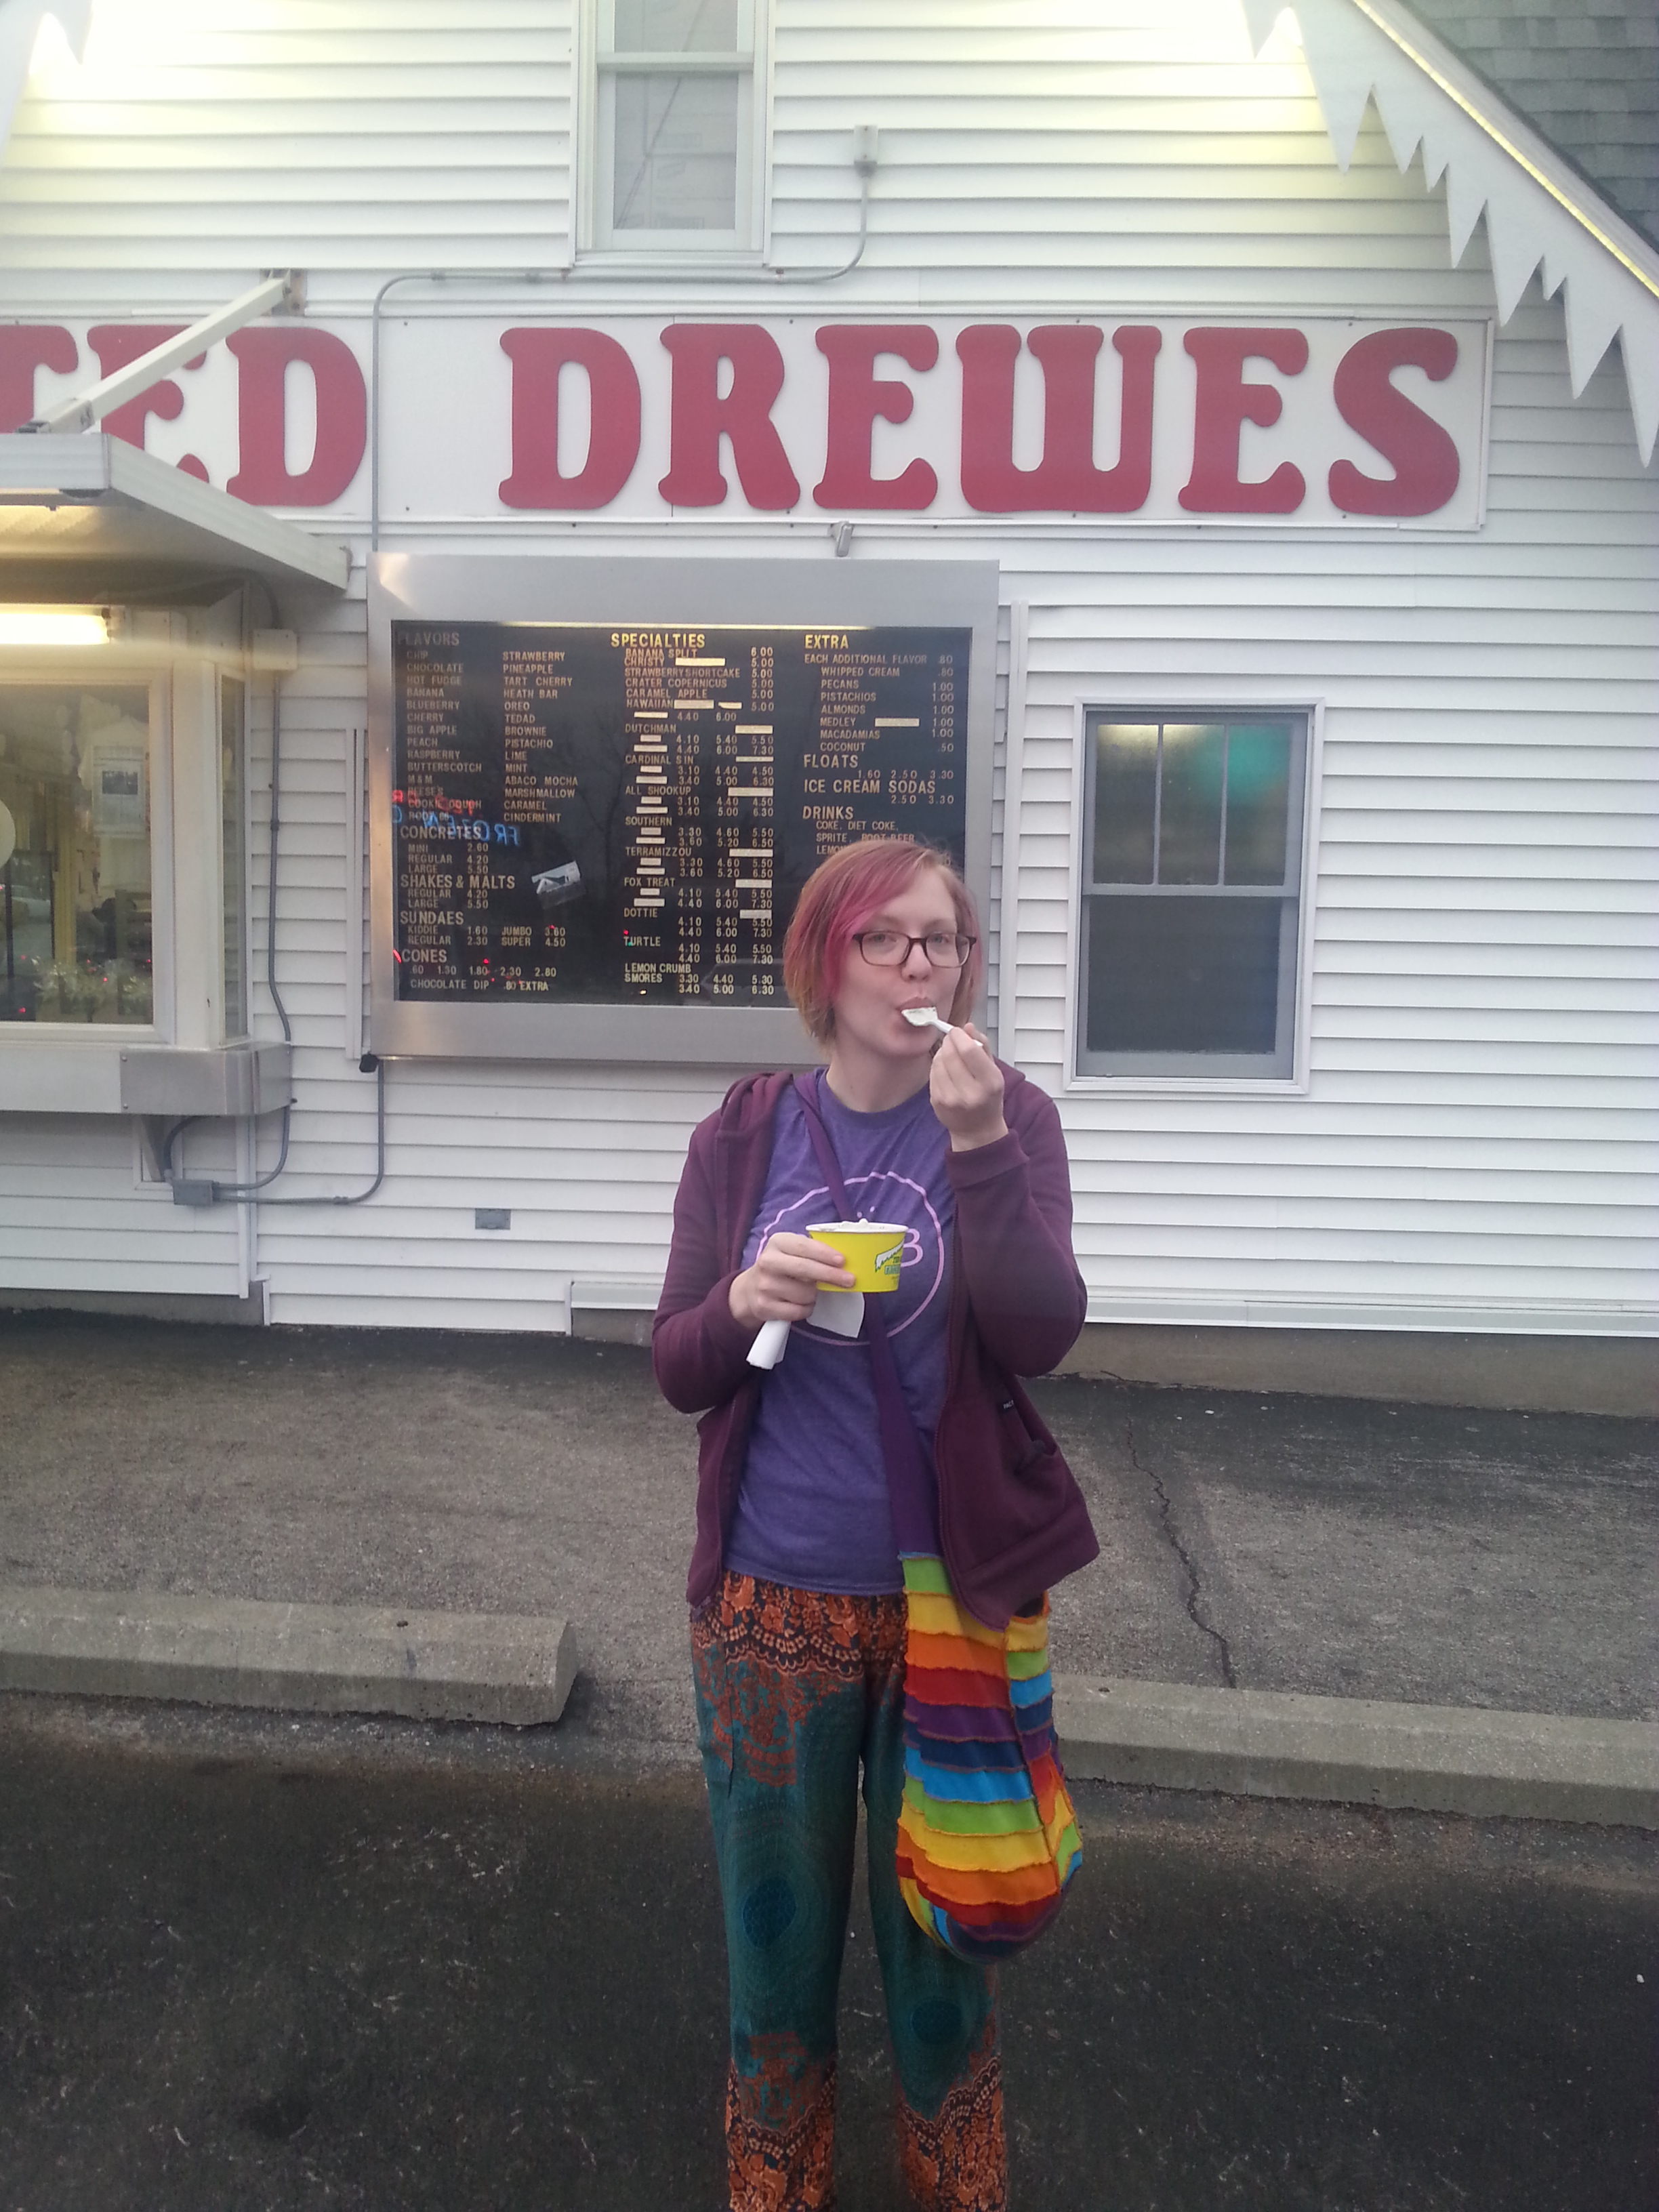 Ted Drewes. Always stop here if you're going through St. Louis.